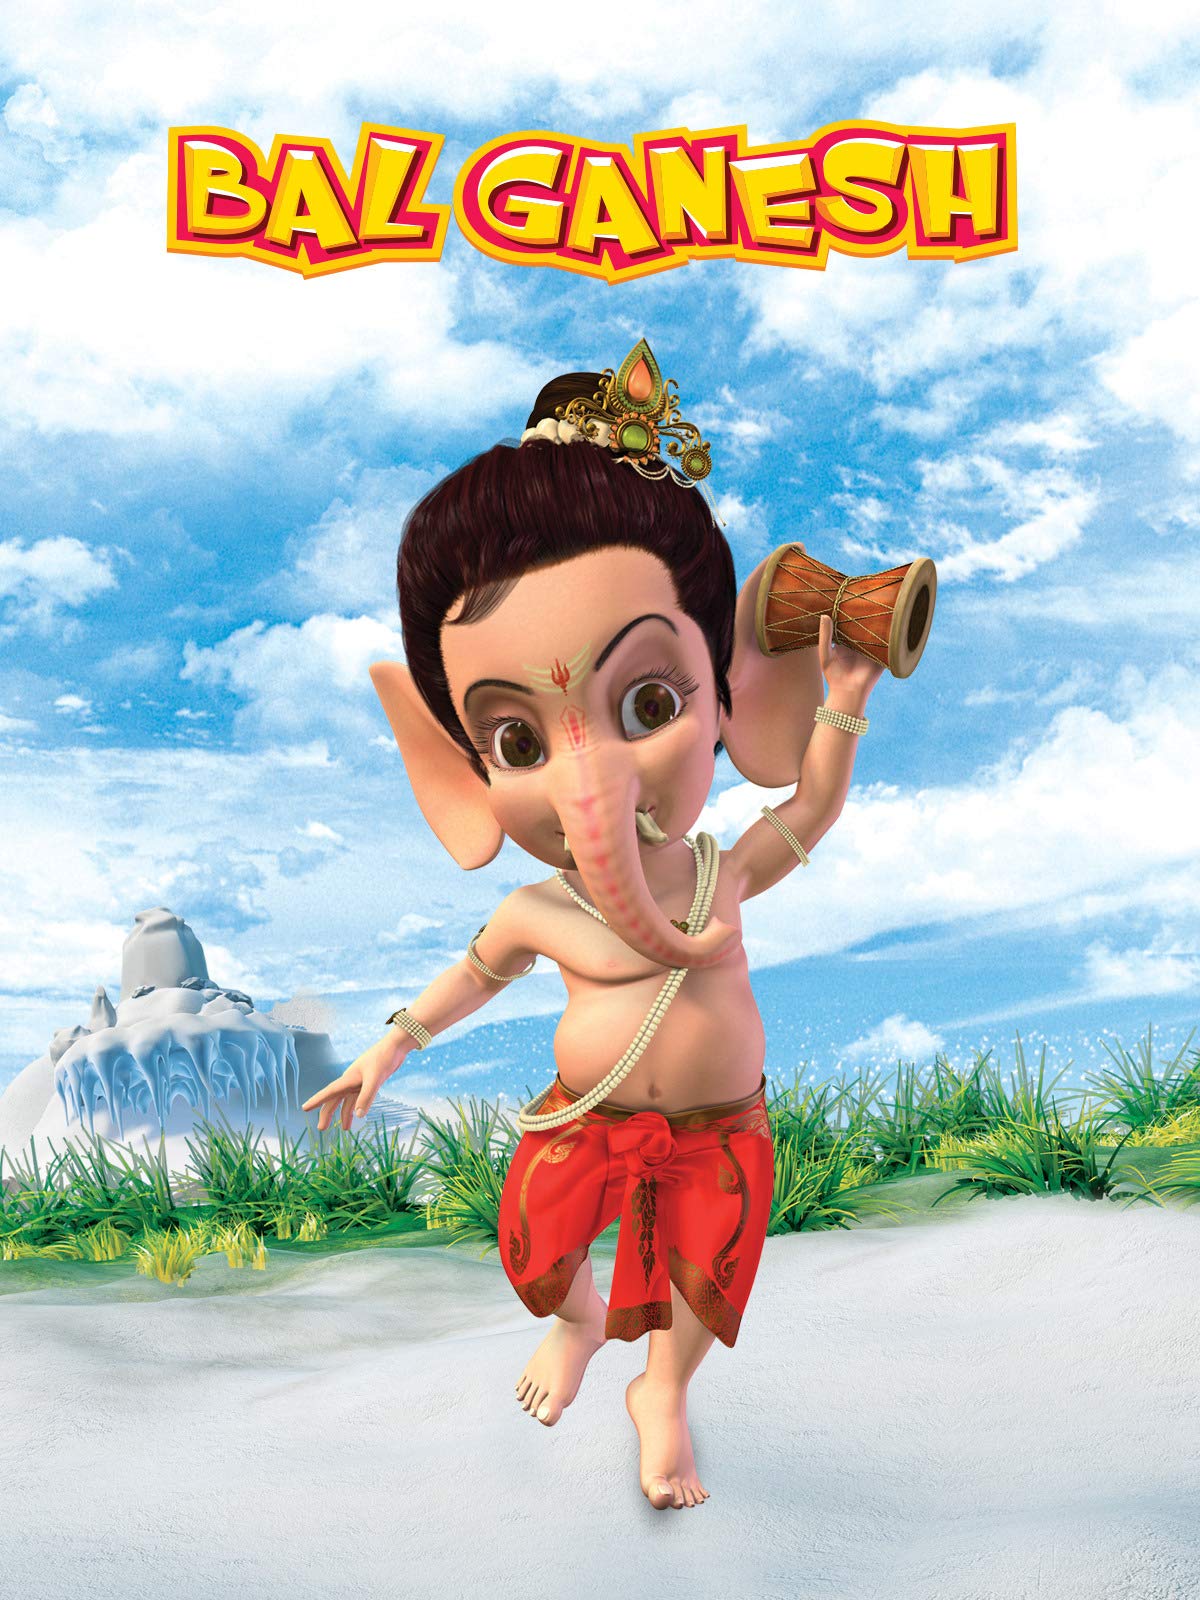 bal-ganesh-best-indian-animated-movies - Pop Culture, Entertainment, Humor,  Travel & More